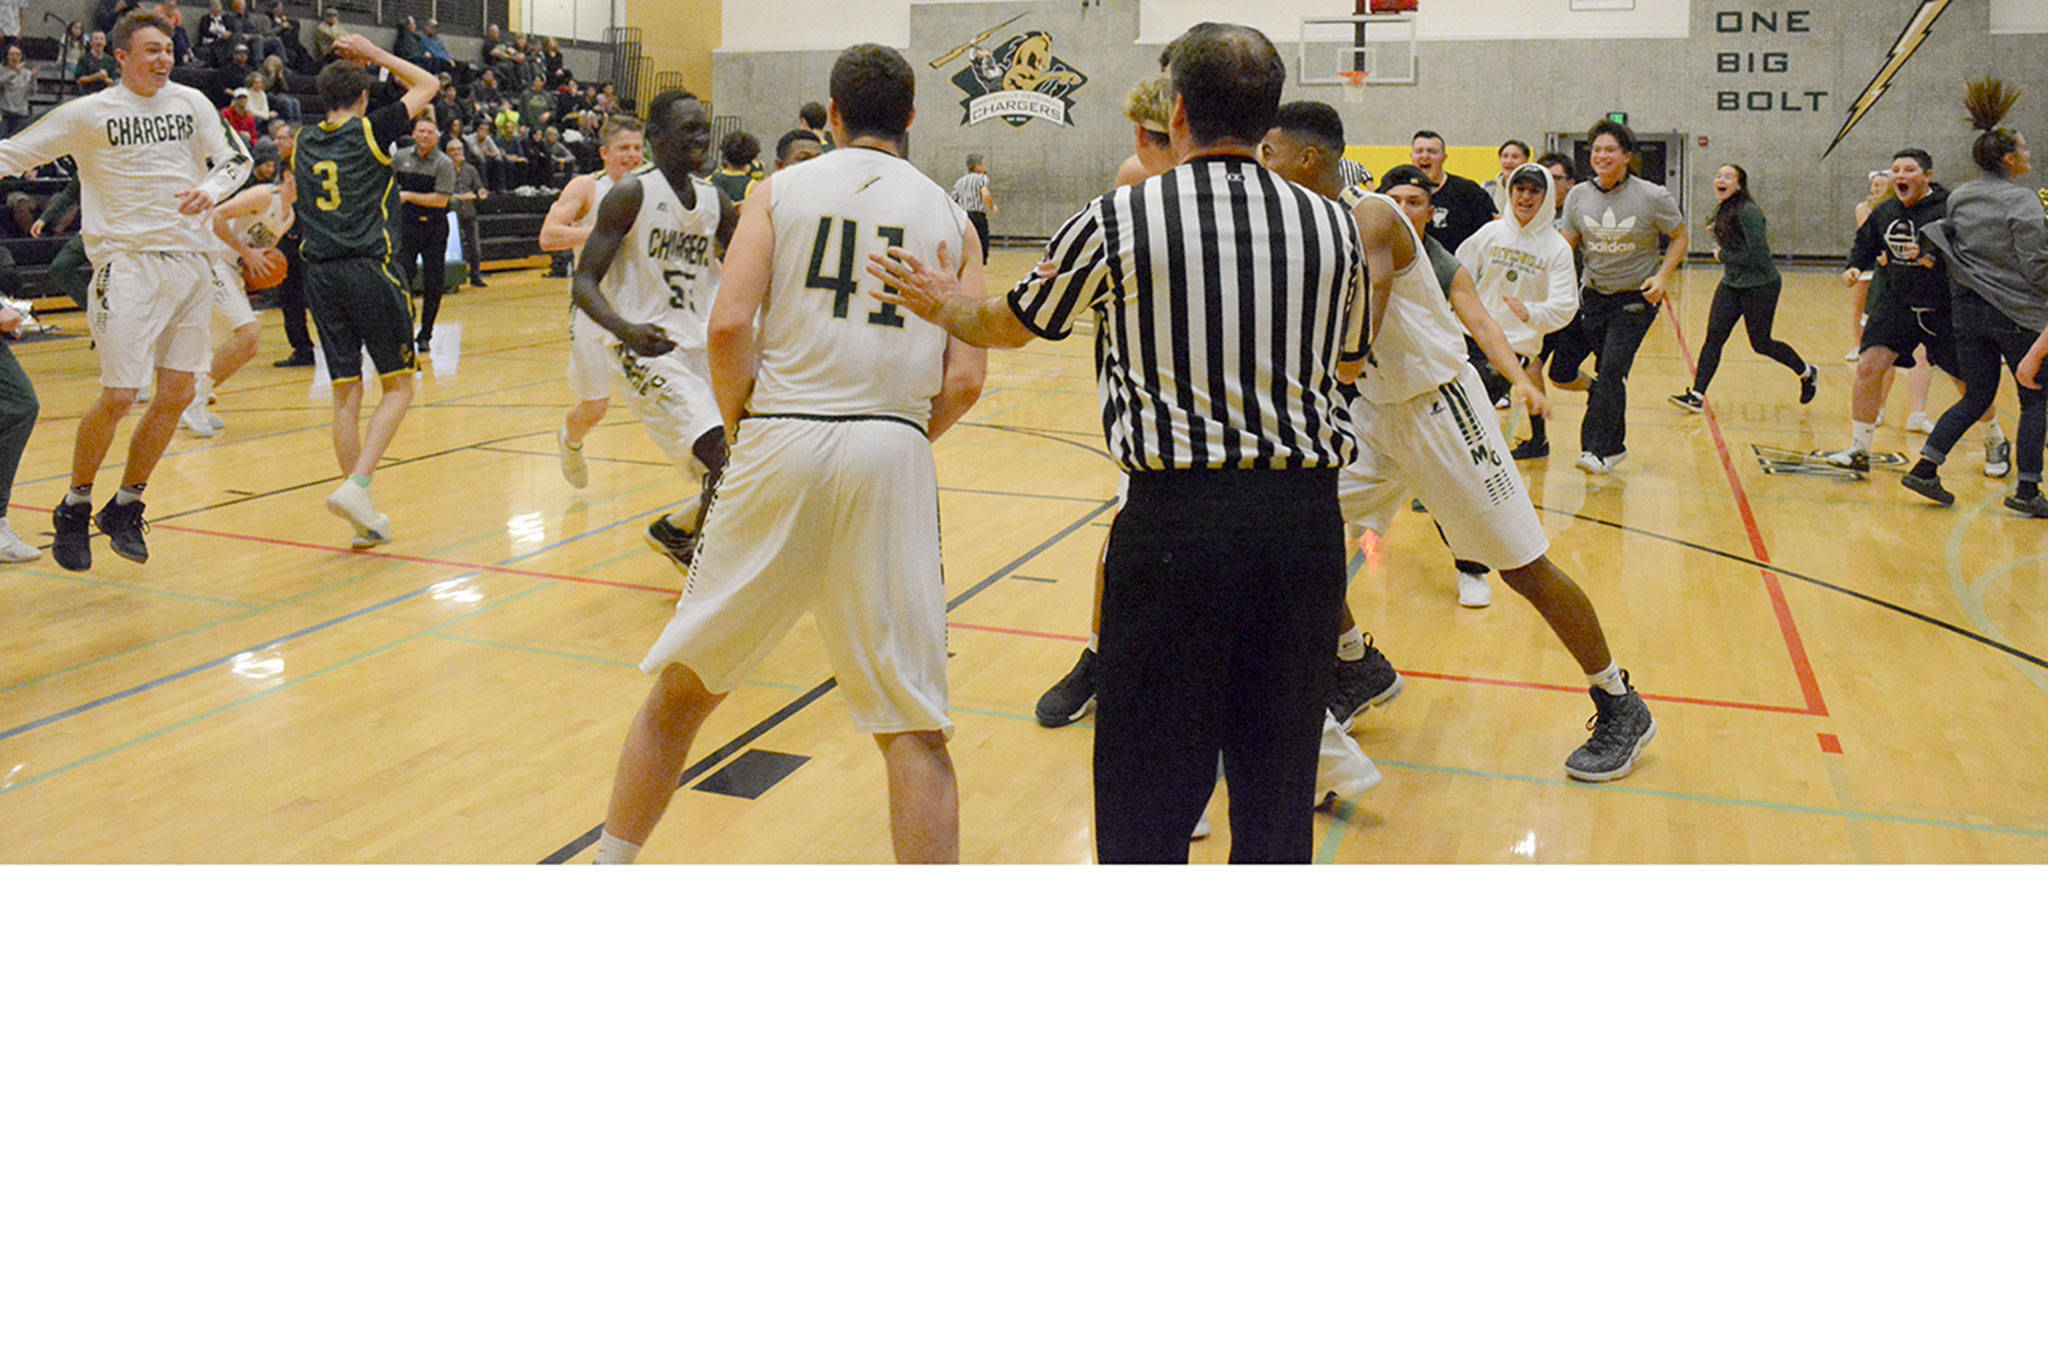 Buzzer beater the difference in MG’s win over Sehome (updated, slide show)